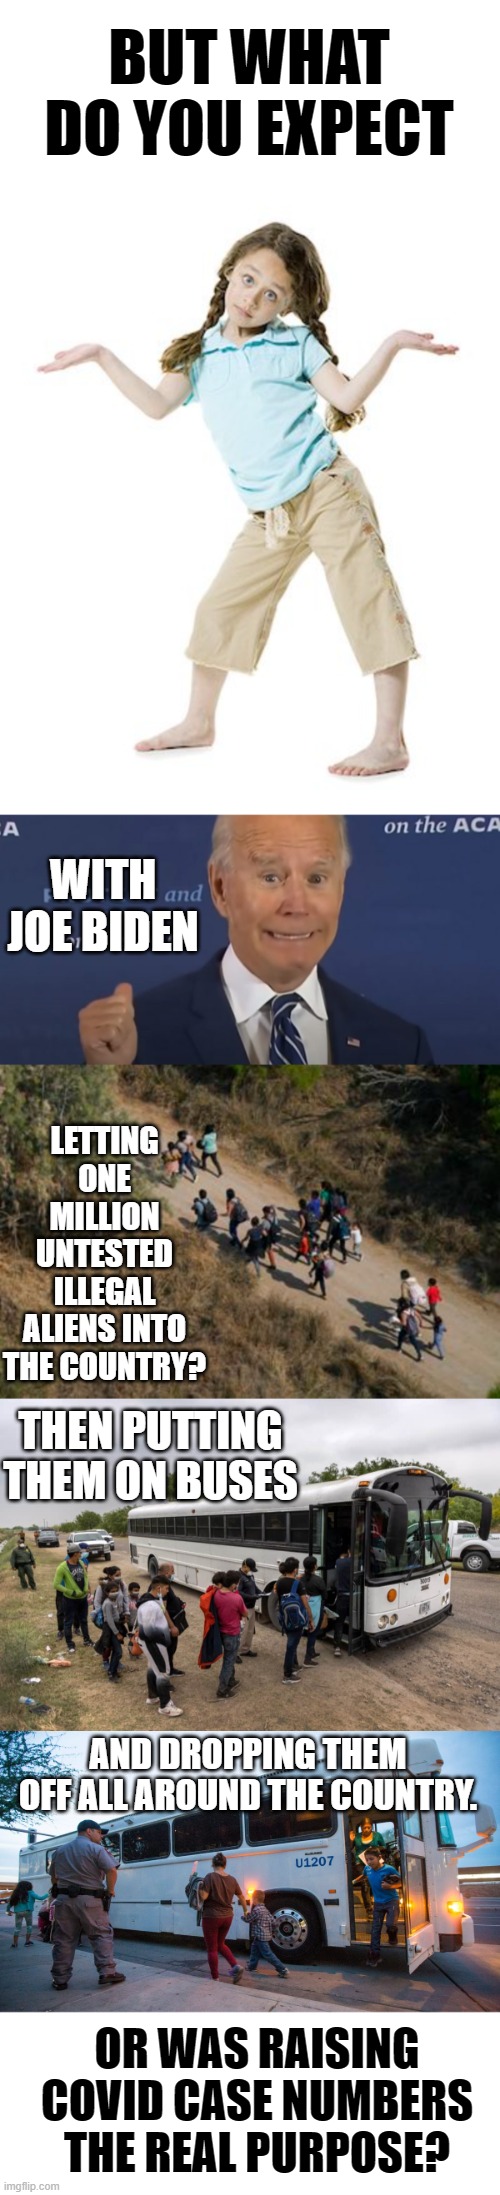 Covid Case Numbers Are Going Up Again | BUT WHAT DO YOU EXPECT; WITH JOE BIDEN; LETTING ONE MILLION UNTESTED ILLEGAL ALIENS INTO THE COUNTRY? THEN PUTTING THEM ON BUSES; AND DROPPING THEM OFF ALL AROUND THE COUNTRY. OR WAS RAISING COVID CASE NUMBERS THE REAL PURPOSE? | image tagged in memes,politics,covid,think about it,untested,illegal immigrants | made w/ Imgflip meme maker